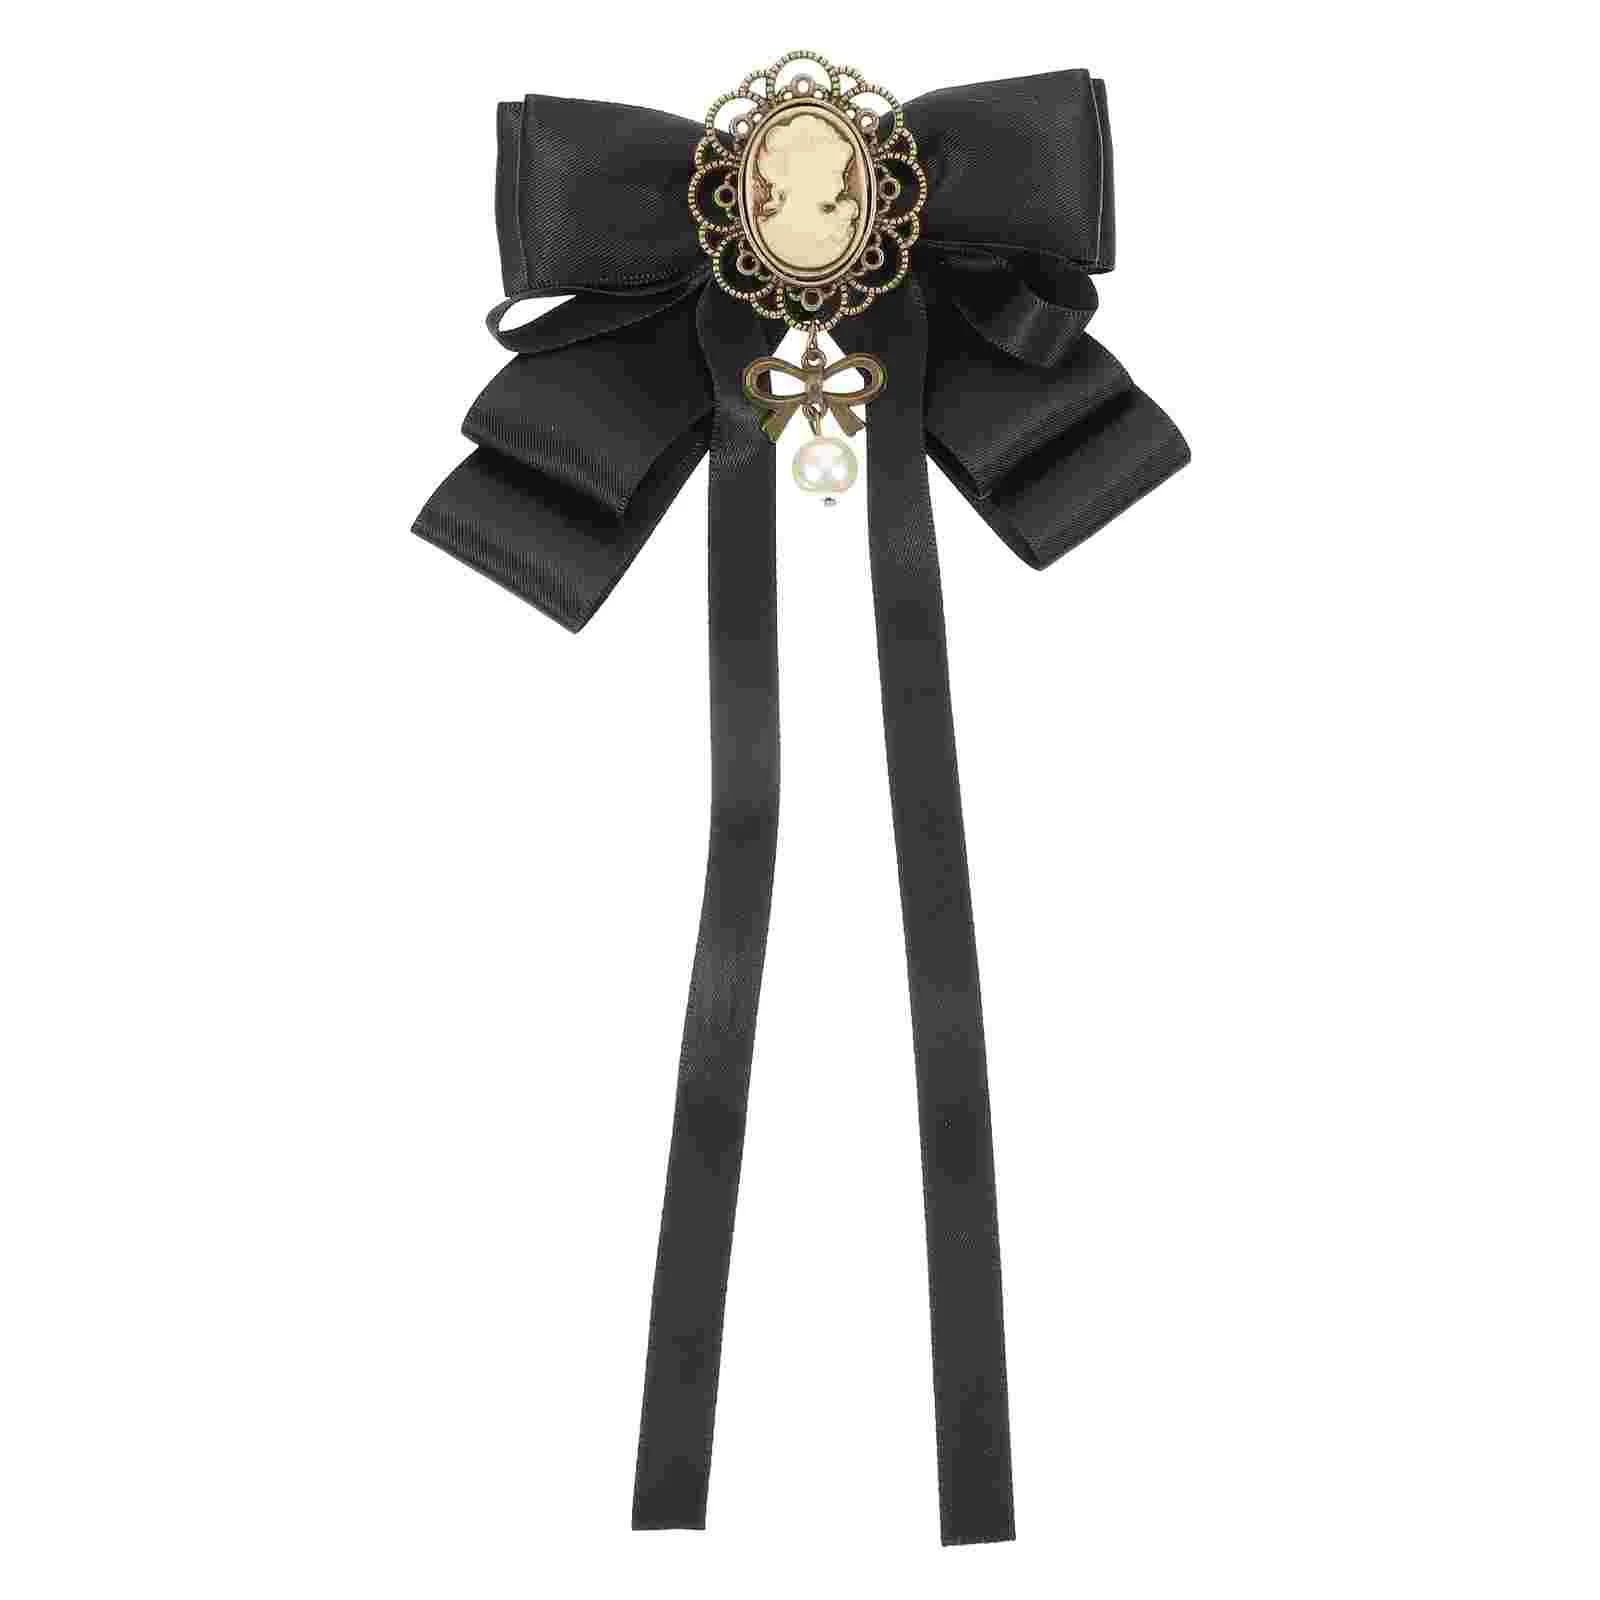 

Brooch Bow Tie Exquisite Breast Pin Retro Bowknot Decorative Stylish Bowtie Ornament for Clothing Unique